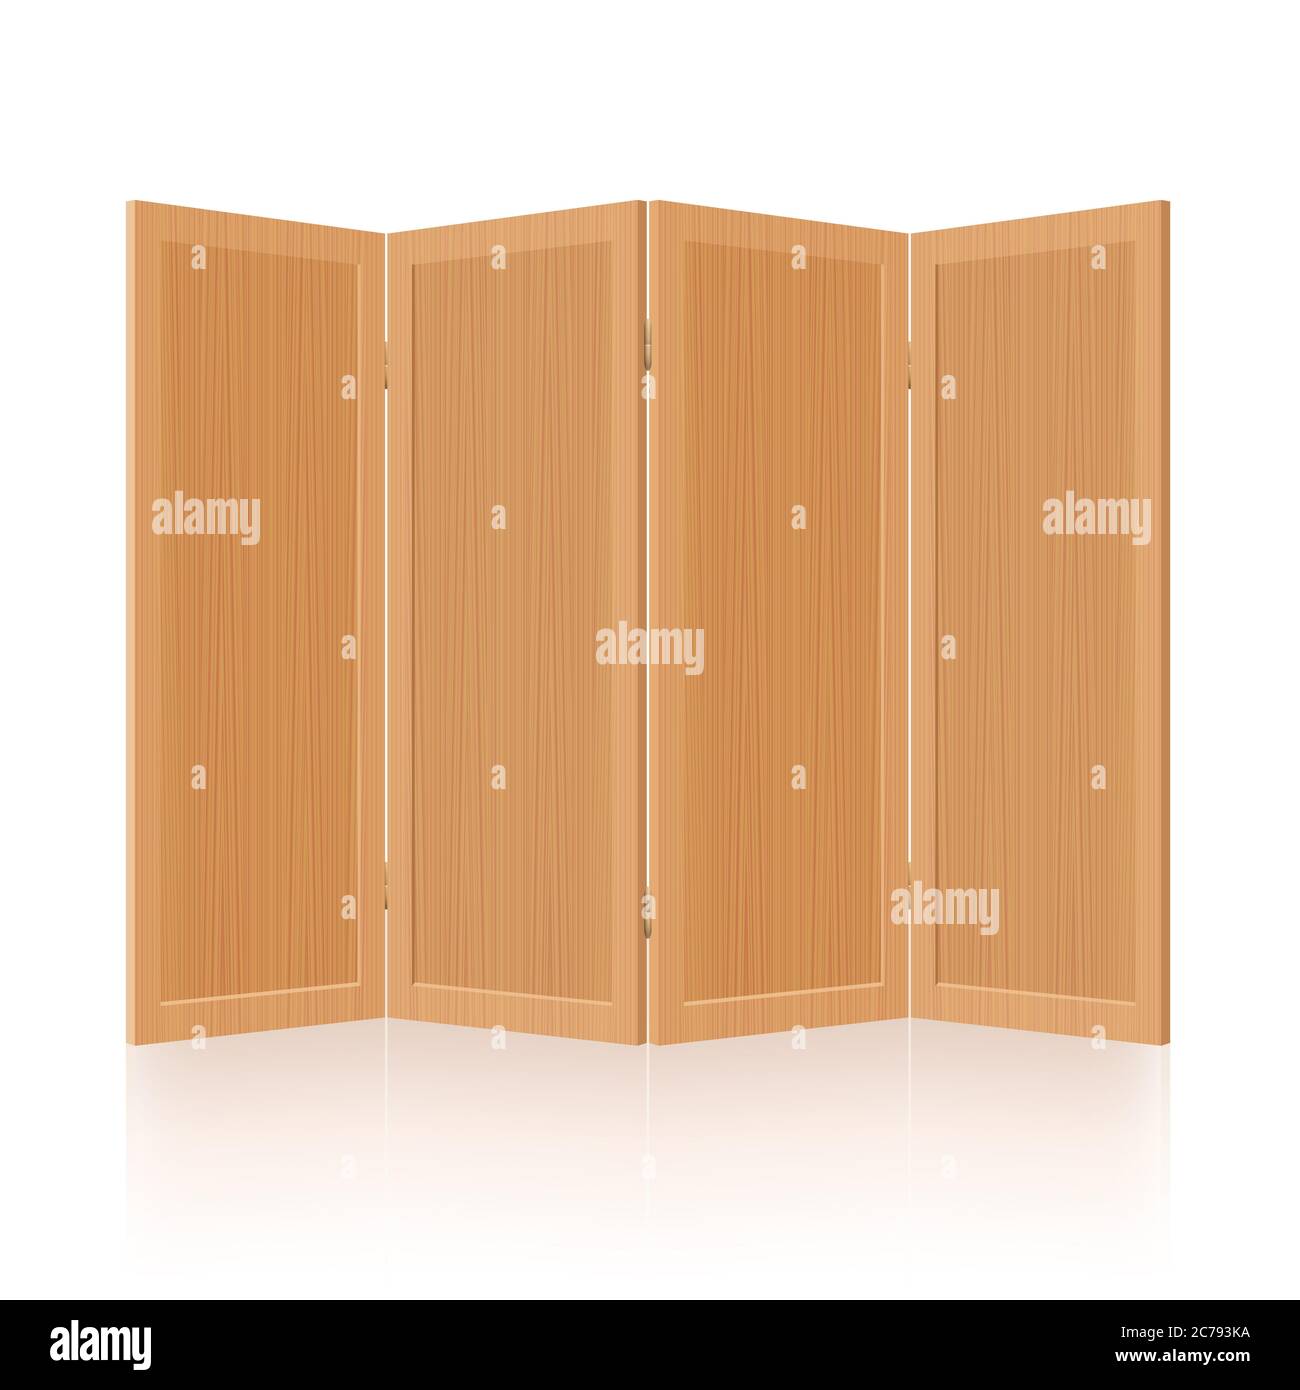 Folding screen, wooden room divider, partition - foldable, mobile, rustic, retro four-part interior furniture - illustration on white background. Stock Photo